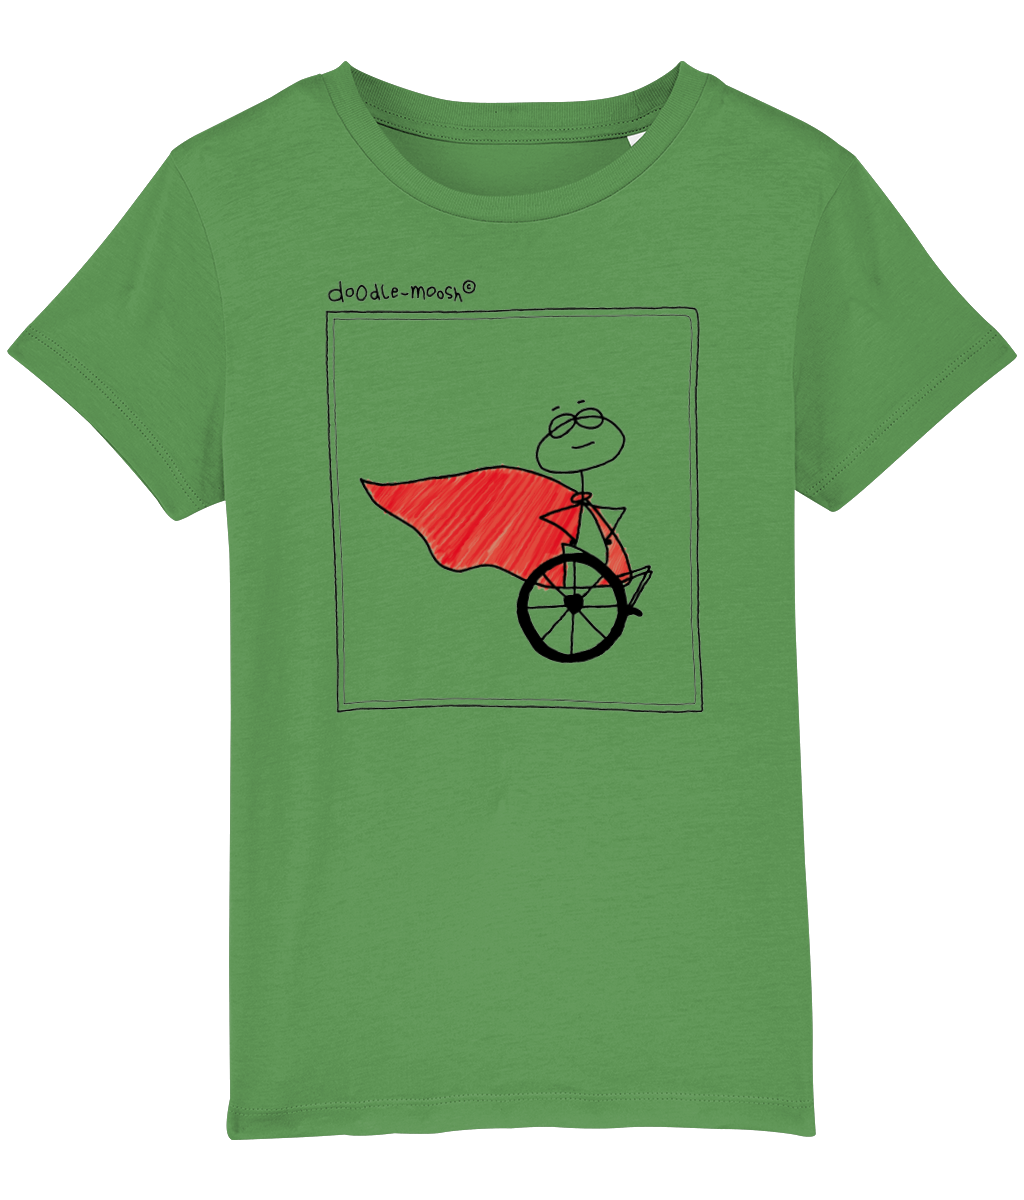 superpower t-shirt, green with black, colorful drawing